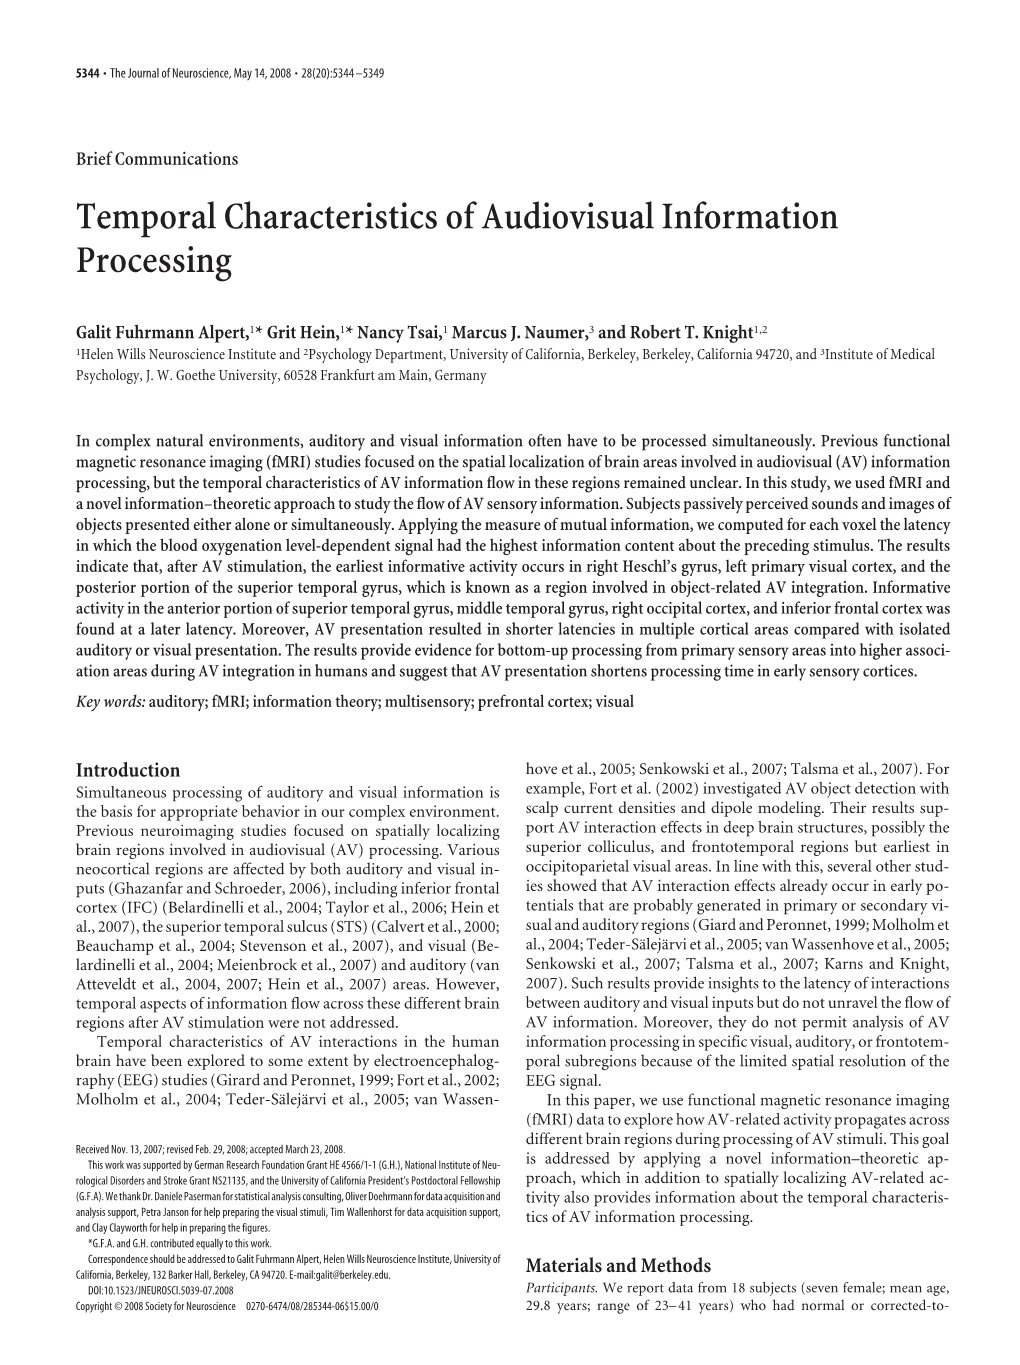 Temporal Characteristics of Audiovisual Information Processing